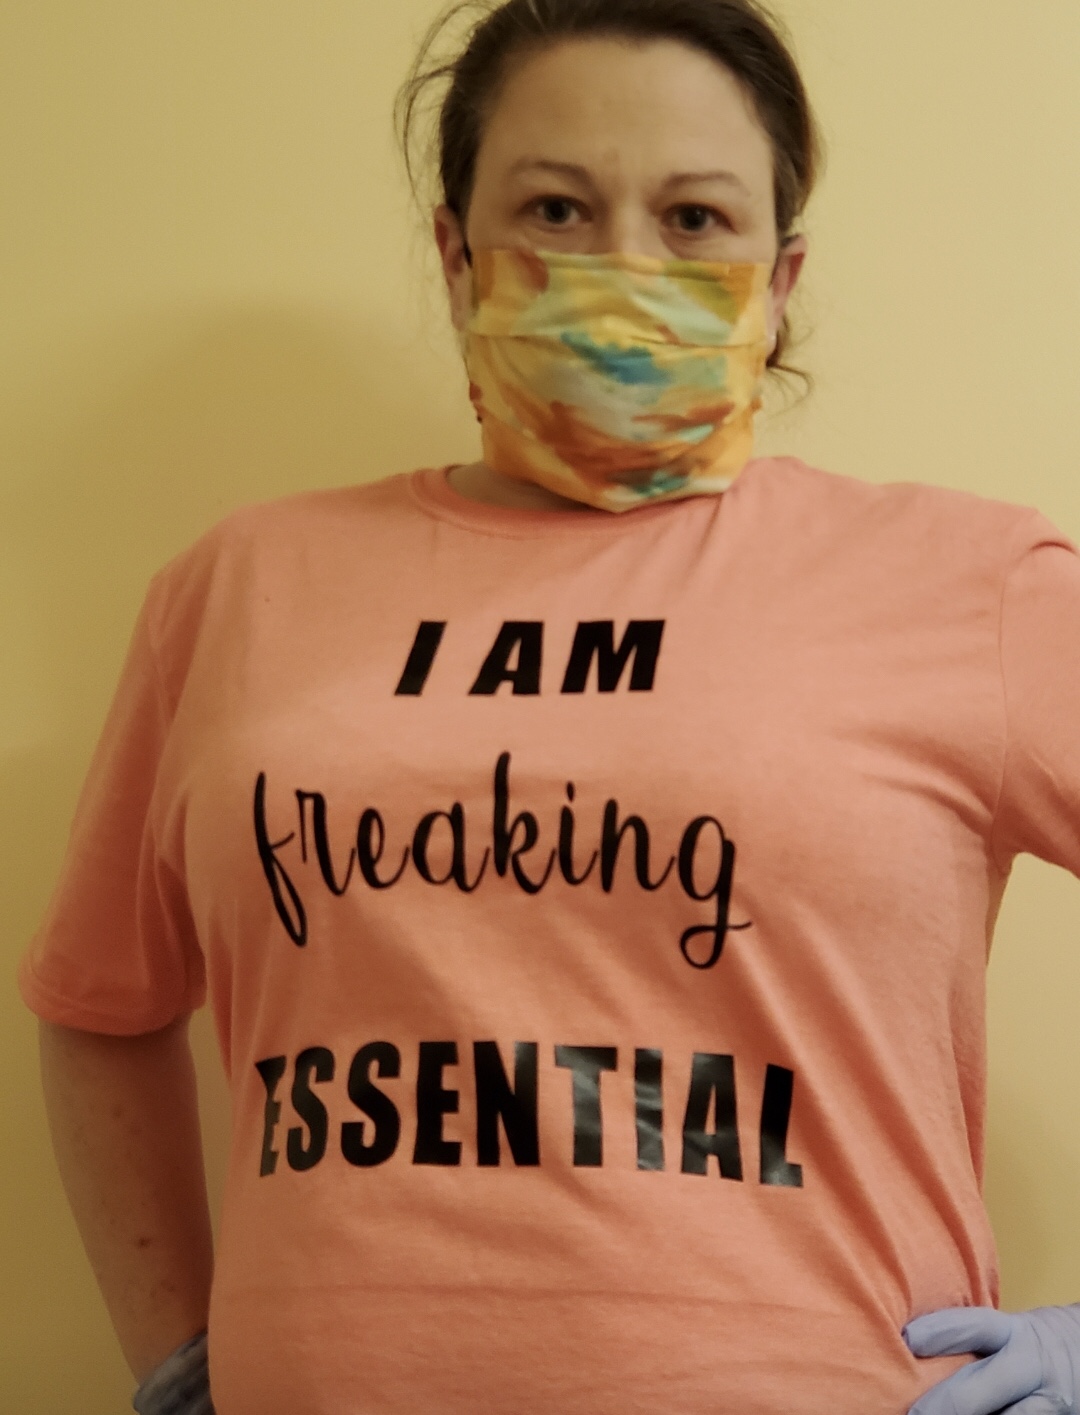 Stacie wearing a face mask and t-shirt that says "I am freaking essential"